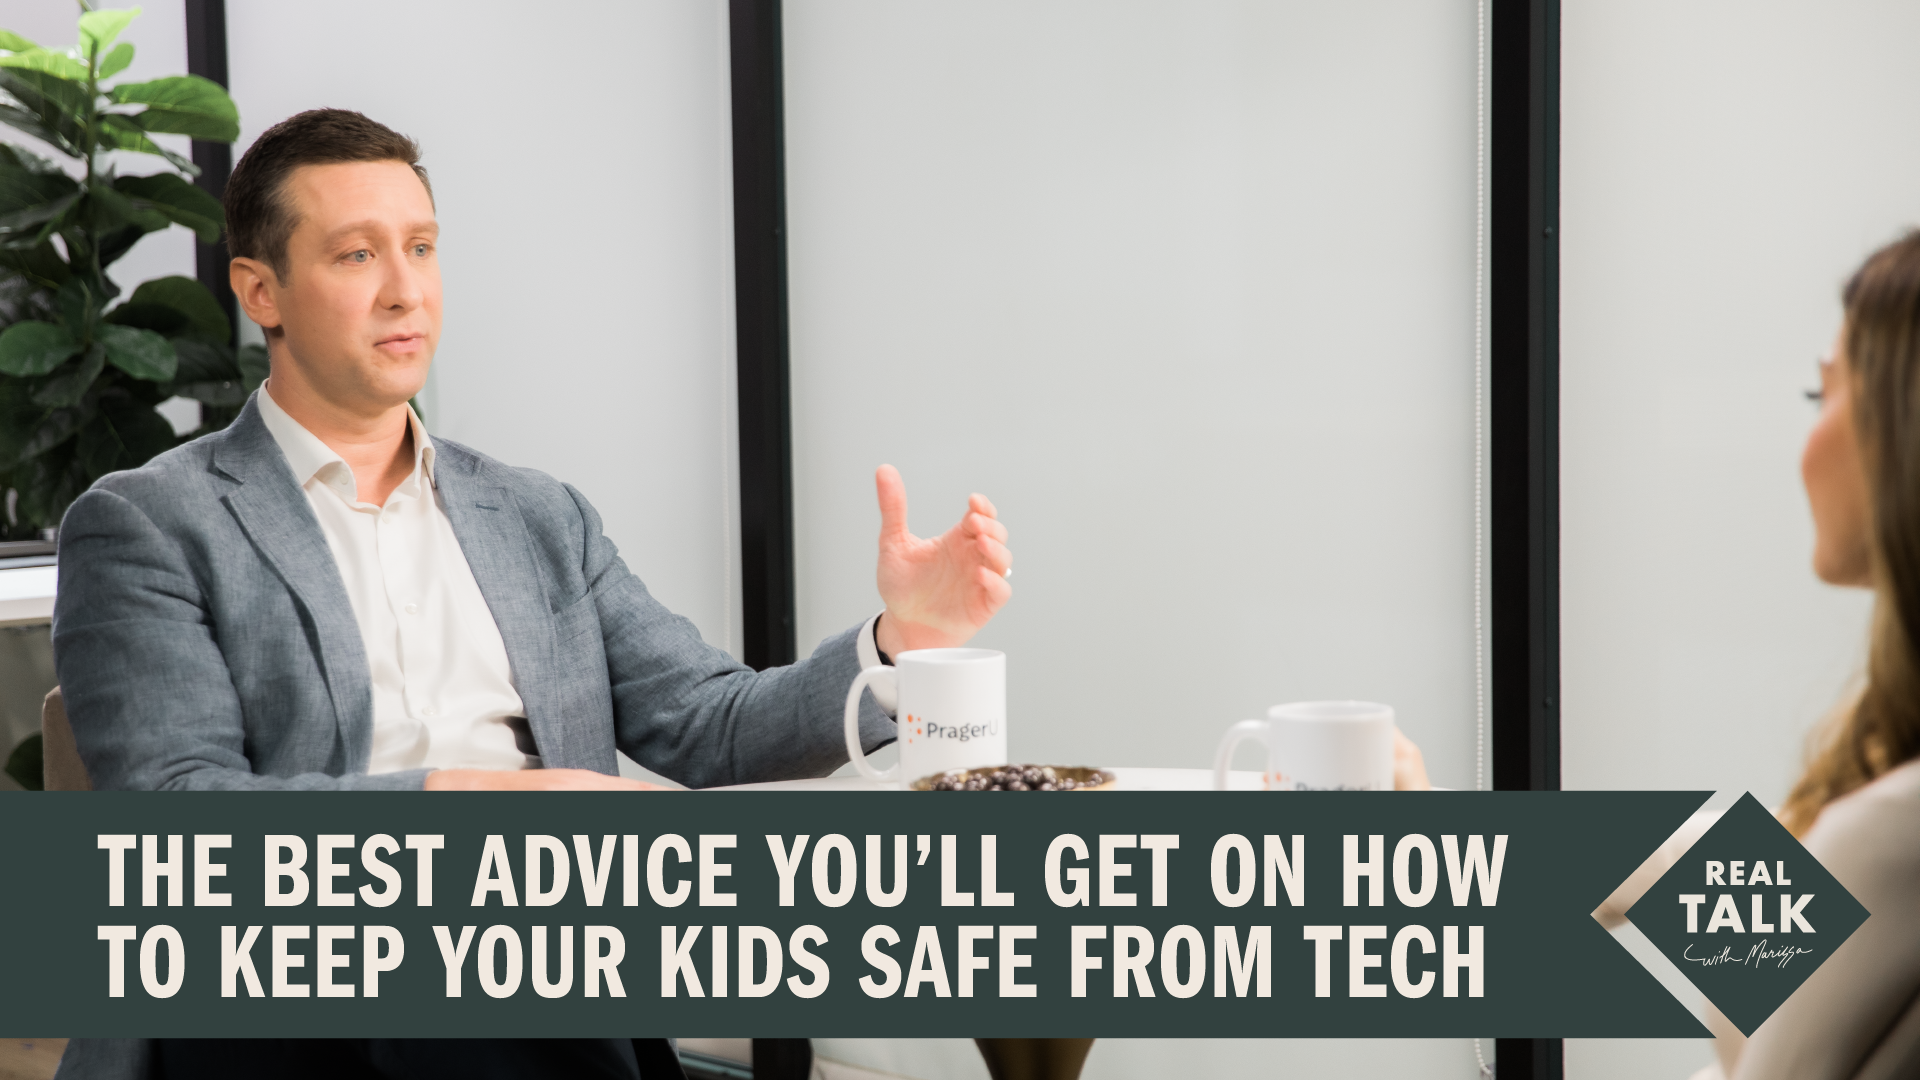 The Best Advice You’ll Get on How to Keep Kids Safe from Tech